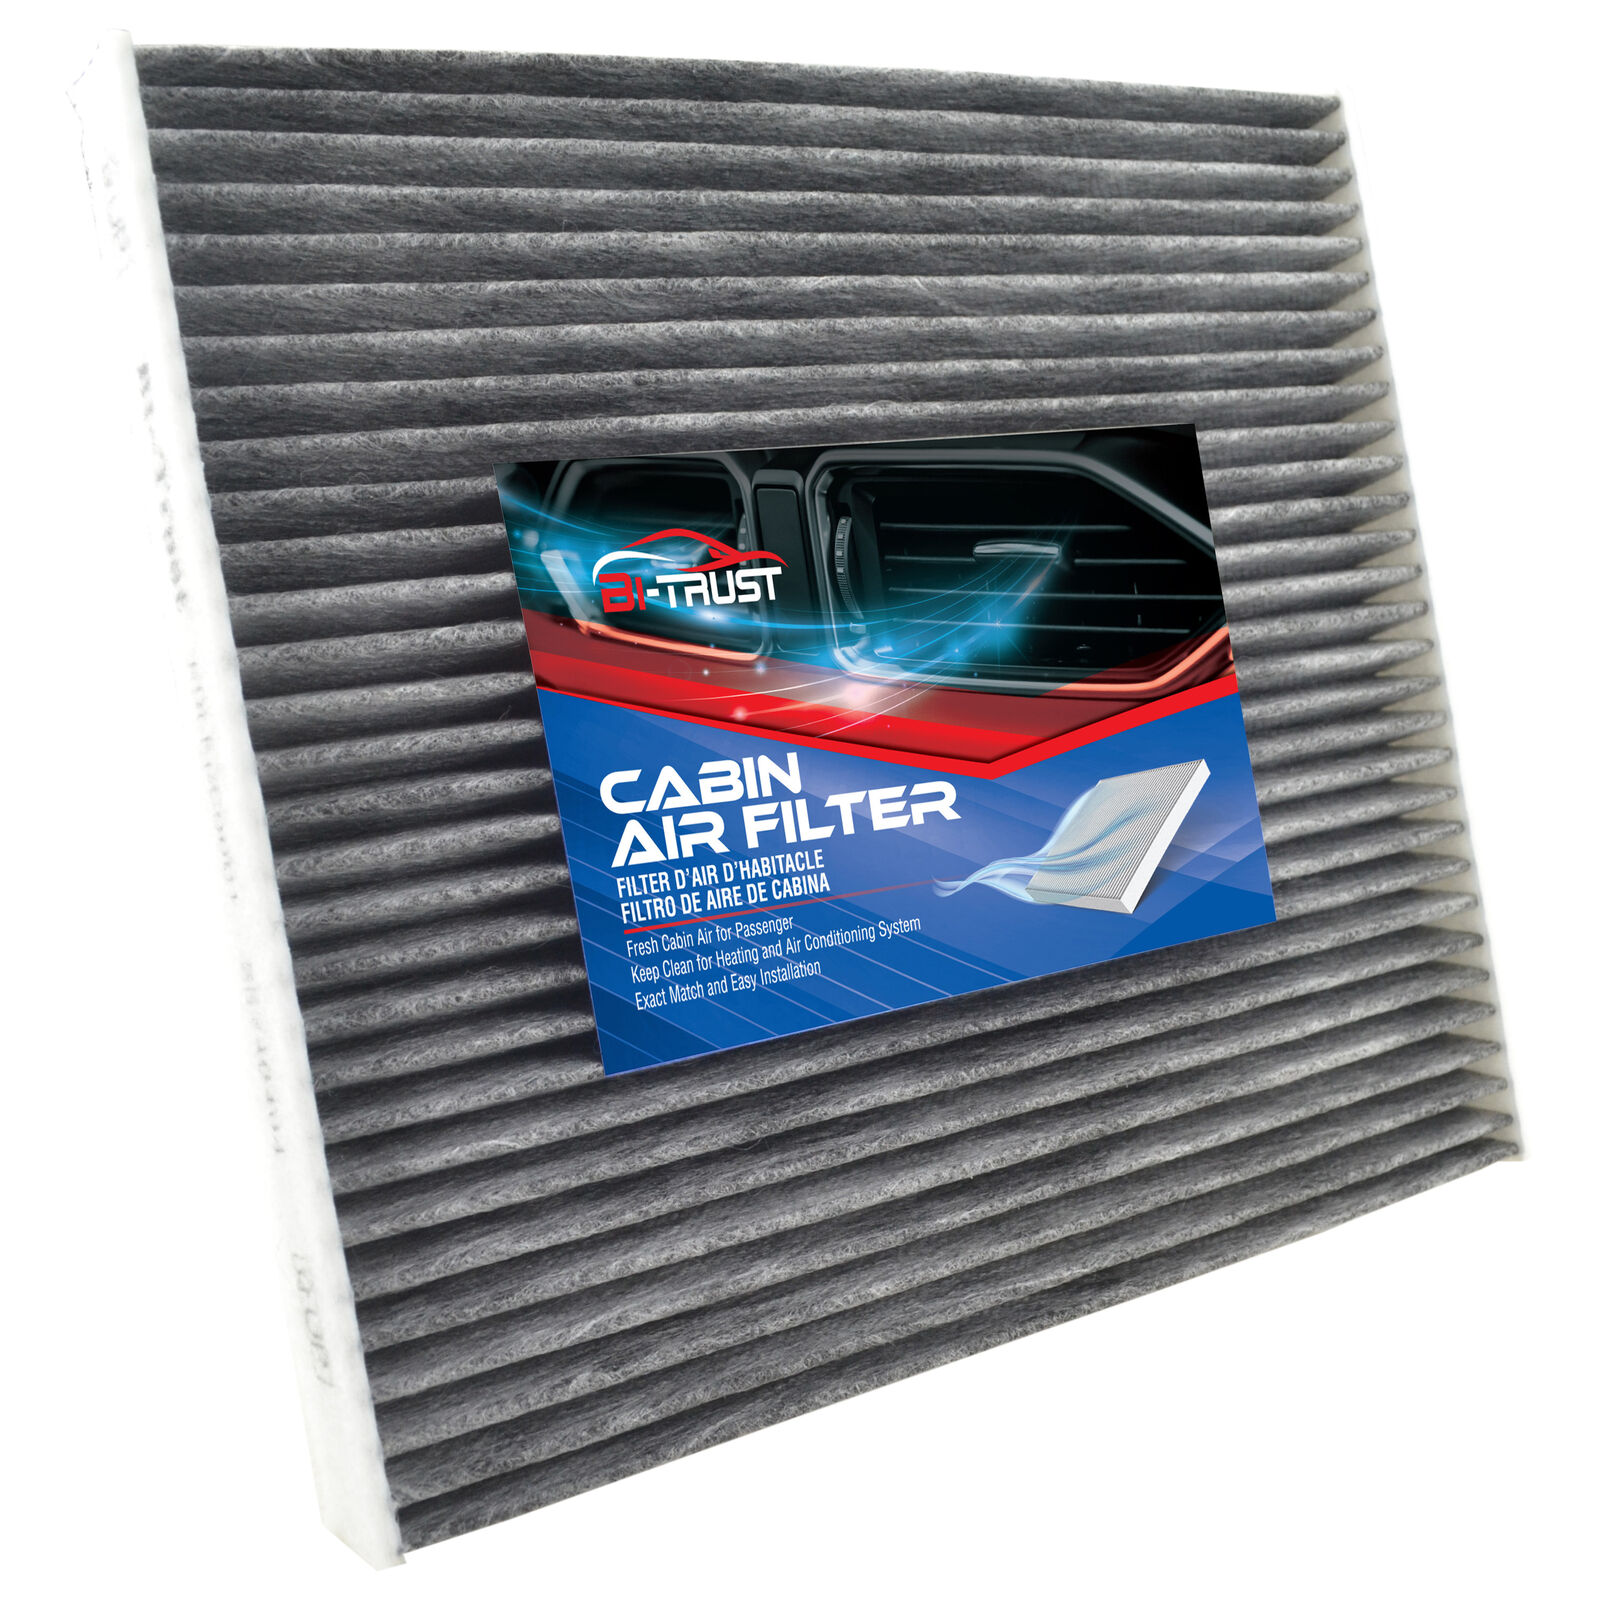 Cabin Air Filter 25740404 for Cadillac CTS 2003-2013 SRX 2004-2009 STS 2005-2011